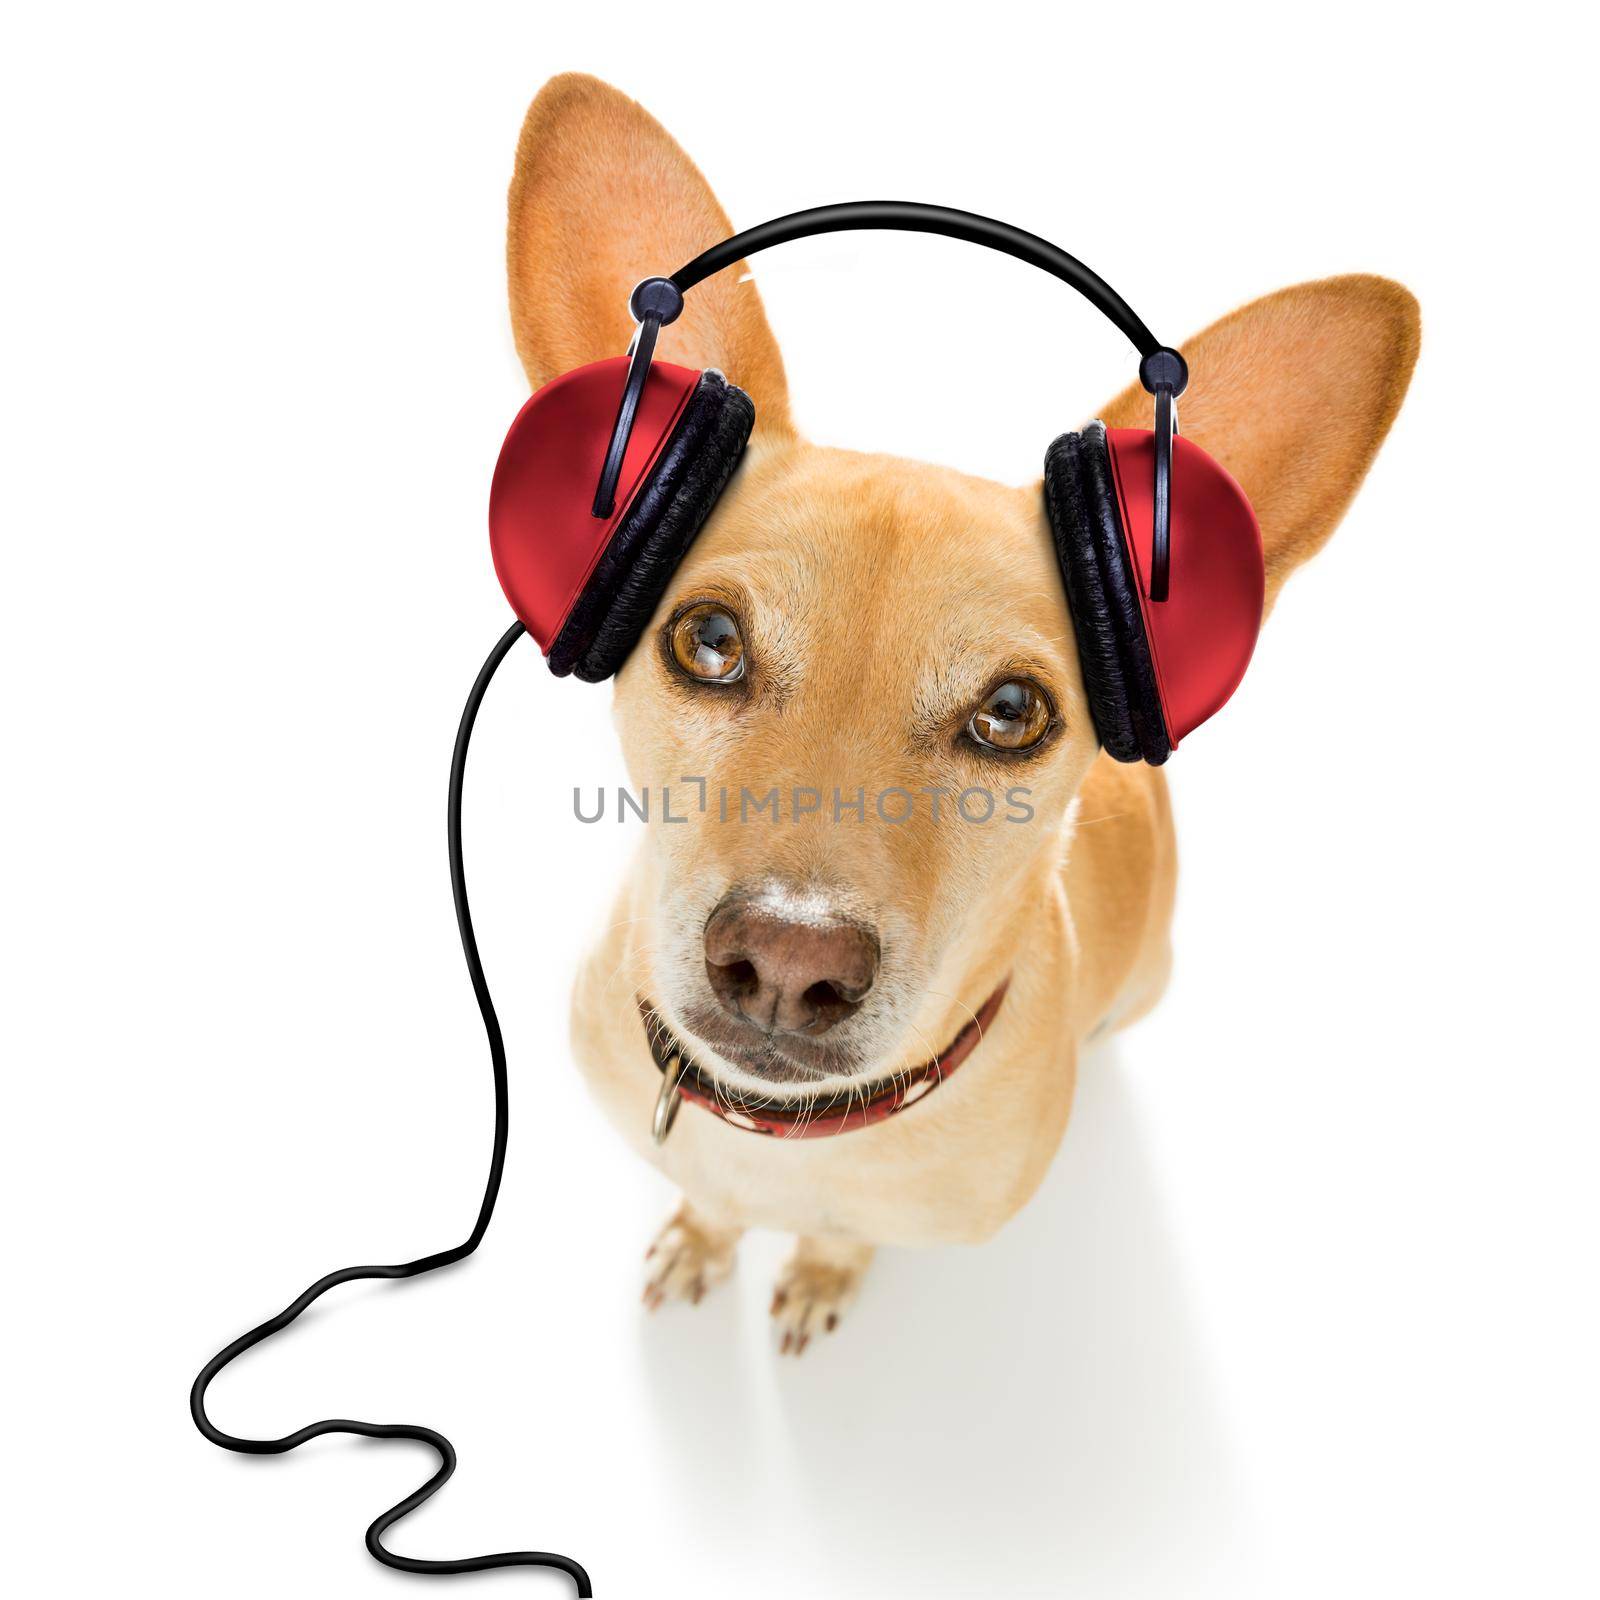 cool dj  chihuahua podenco dog listening or singing to music  with headphones and mp3 player,   isolated on white background